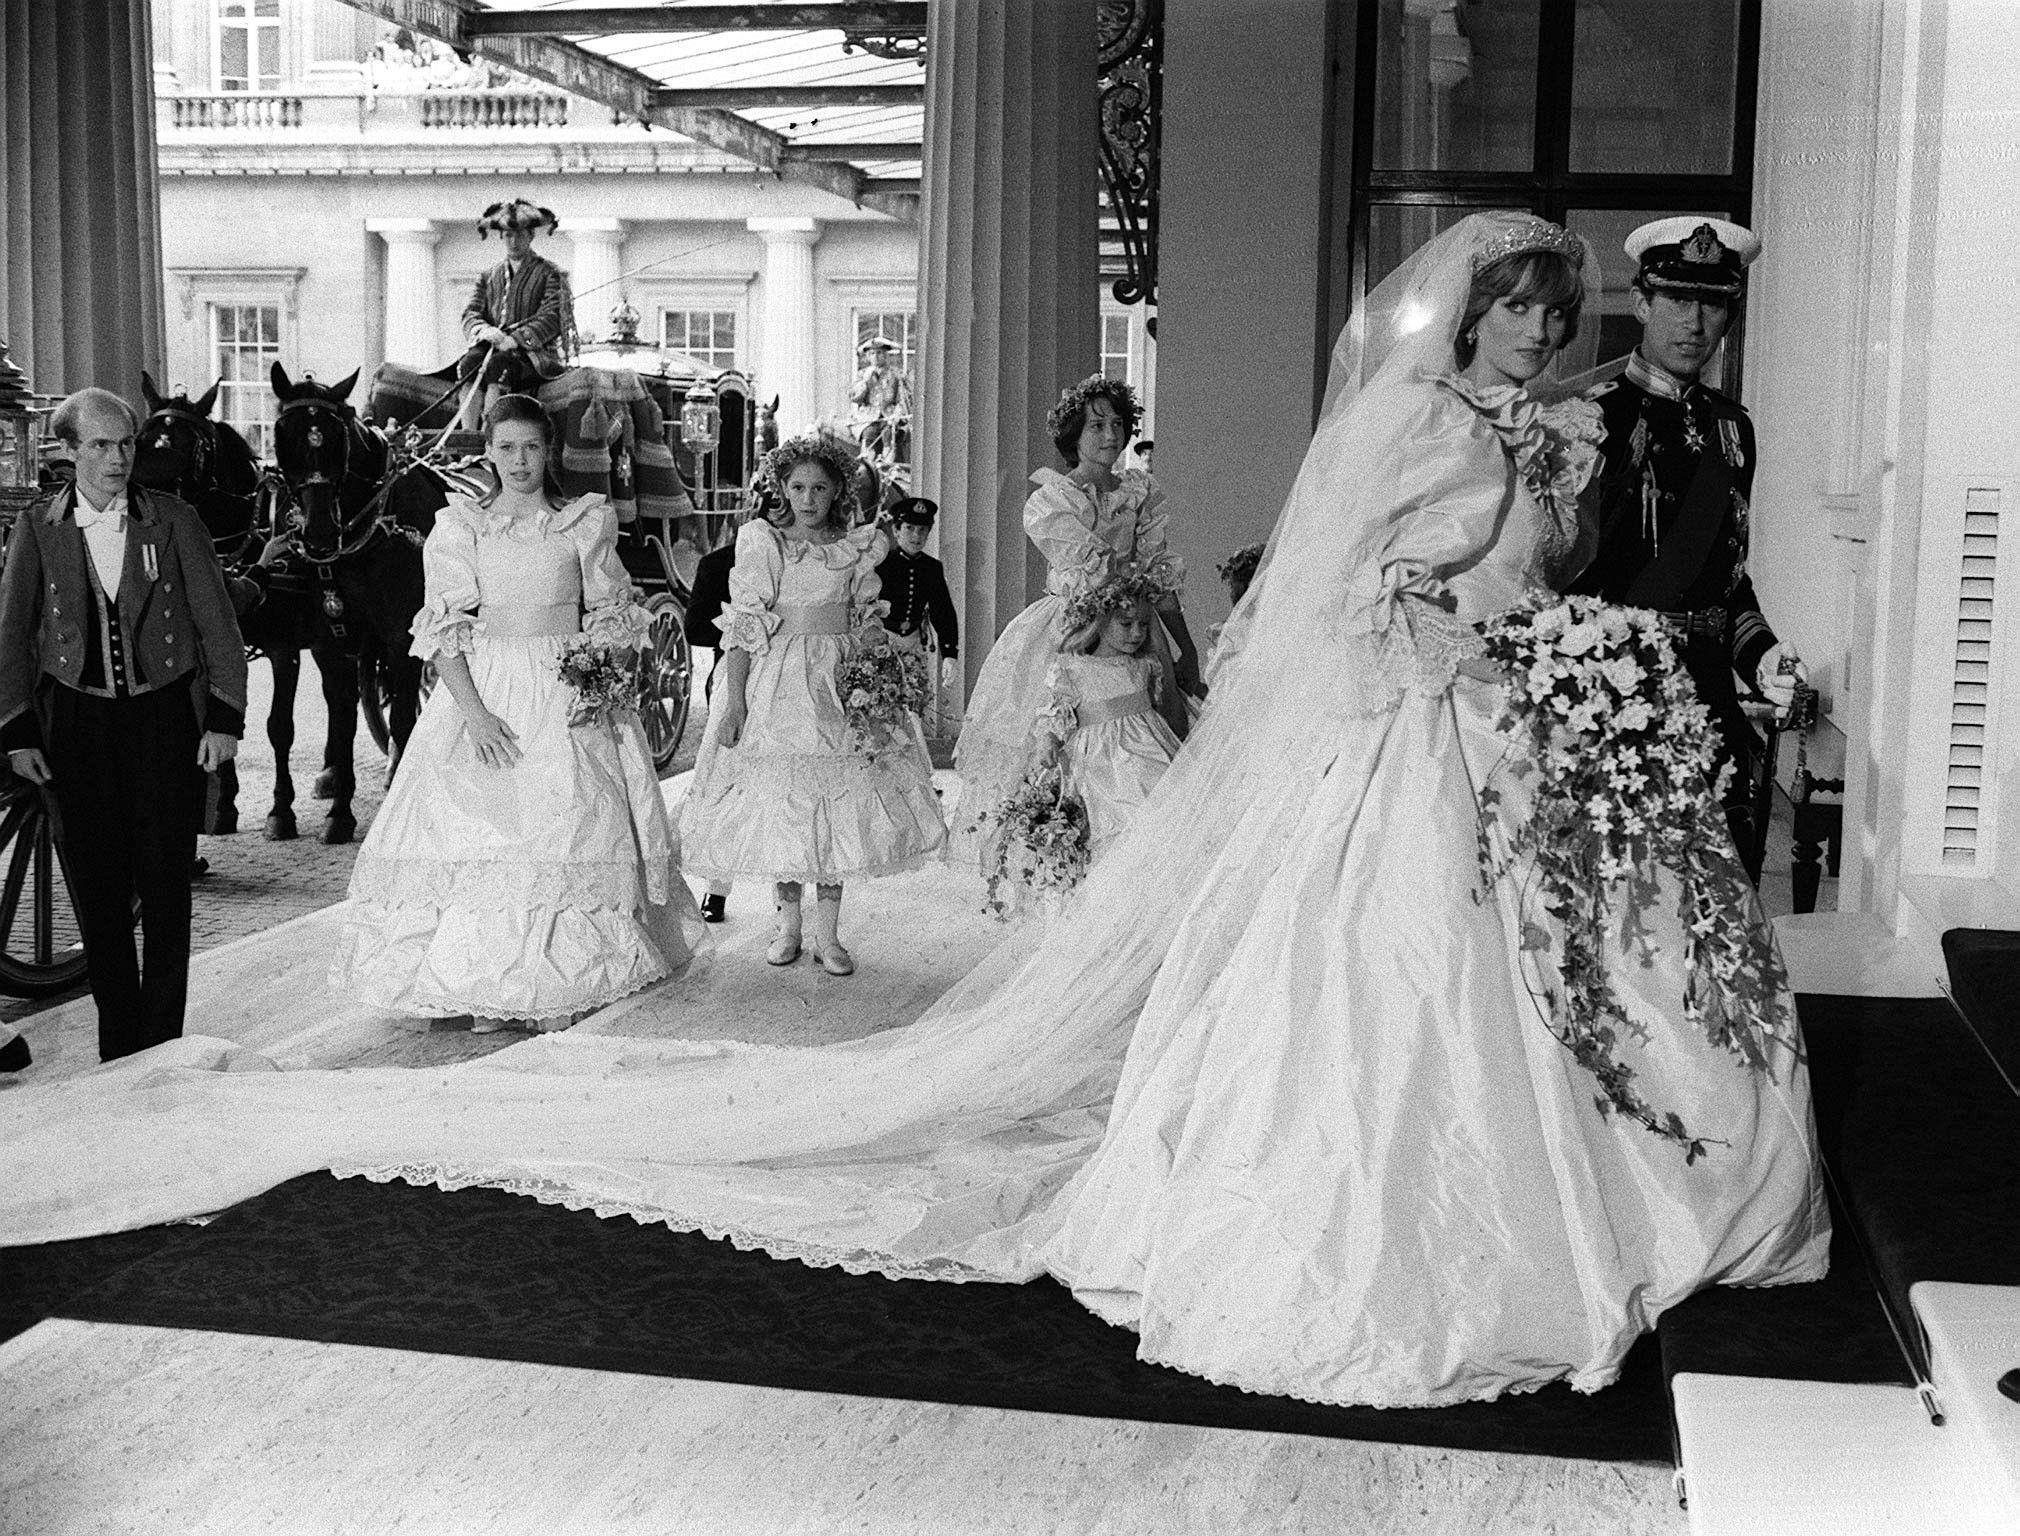 <p>People were thrilled when Lady Diana Spencer married Prince Charles in 1981. The dress! The ring! They couldn't get enough of the romance—and you've likely seen approximately a million pictures from that day as a result. Still, we dove deep into the archives and managed to find some photos you probably haven’t seen before. Prepare yourself for some serious gems, ahead.</p>